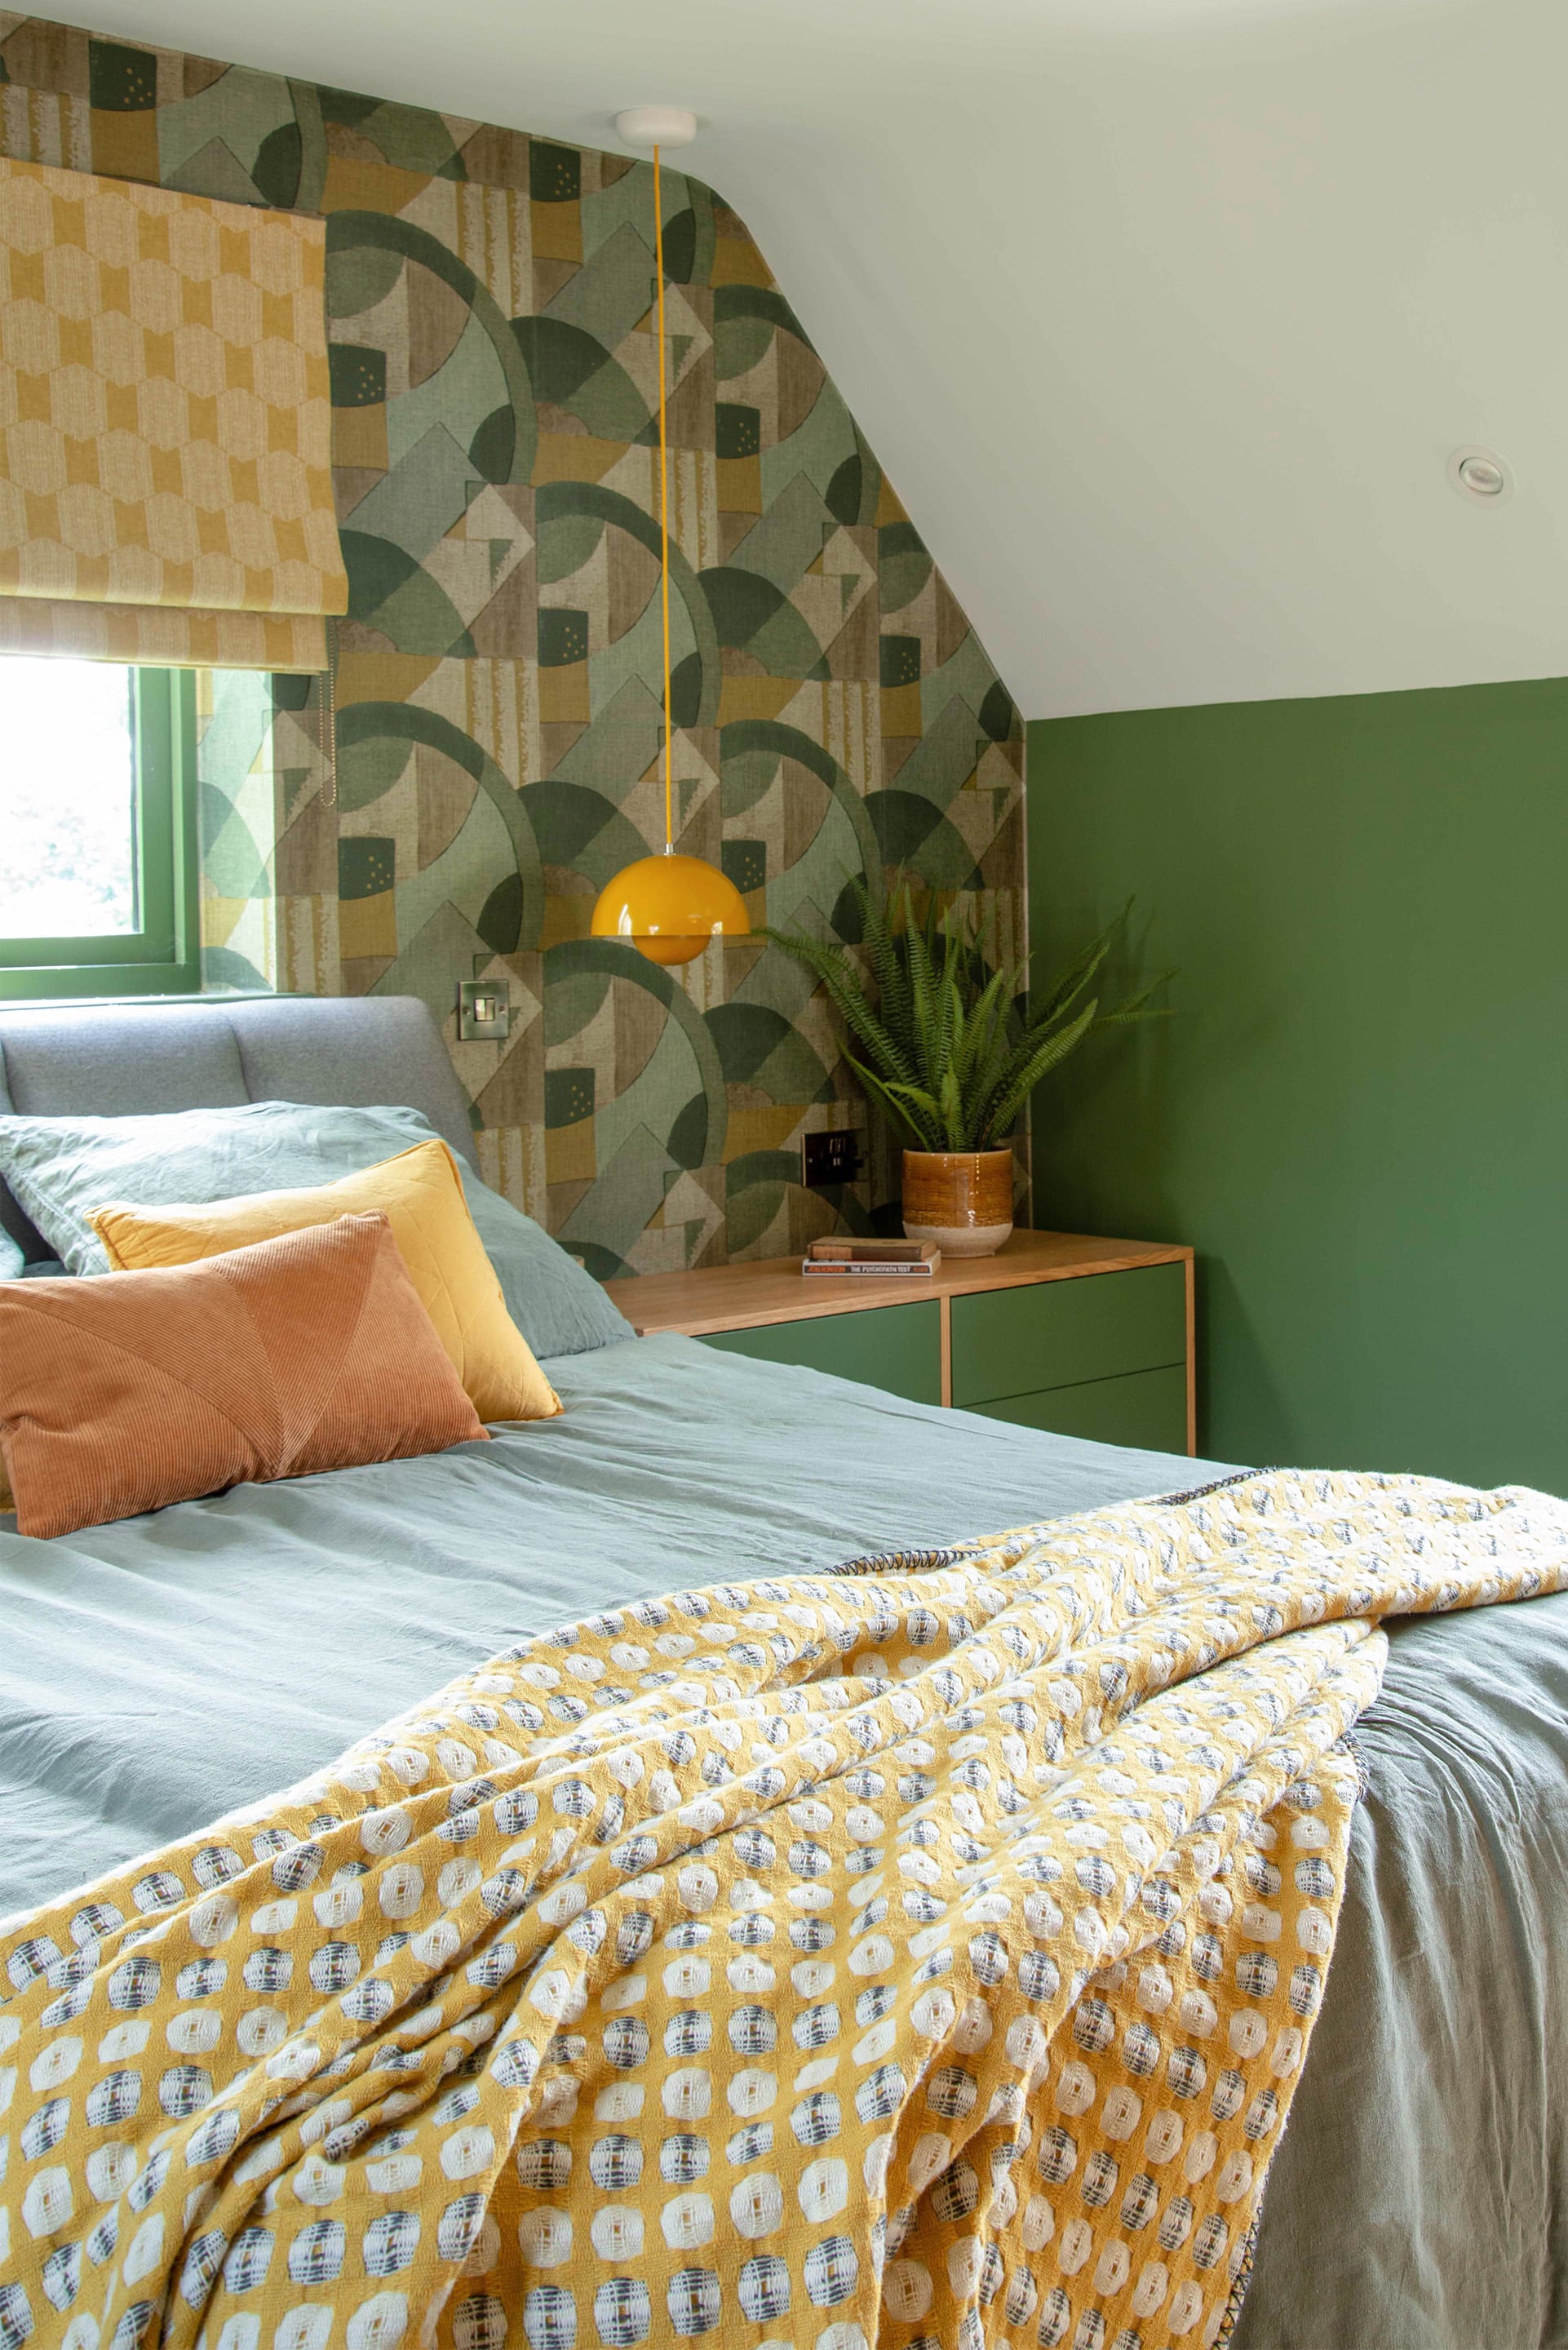 A colourful mid-century influenced bedroom, with abstract green and gold wallpaper, rich green walls and vibrant yellow pops of colour in the lamps and blankets. 